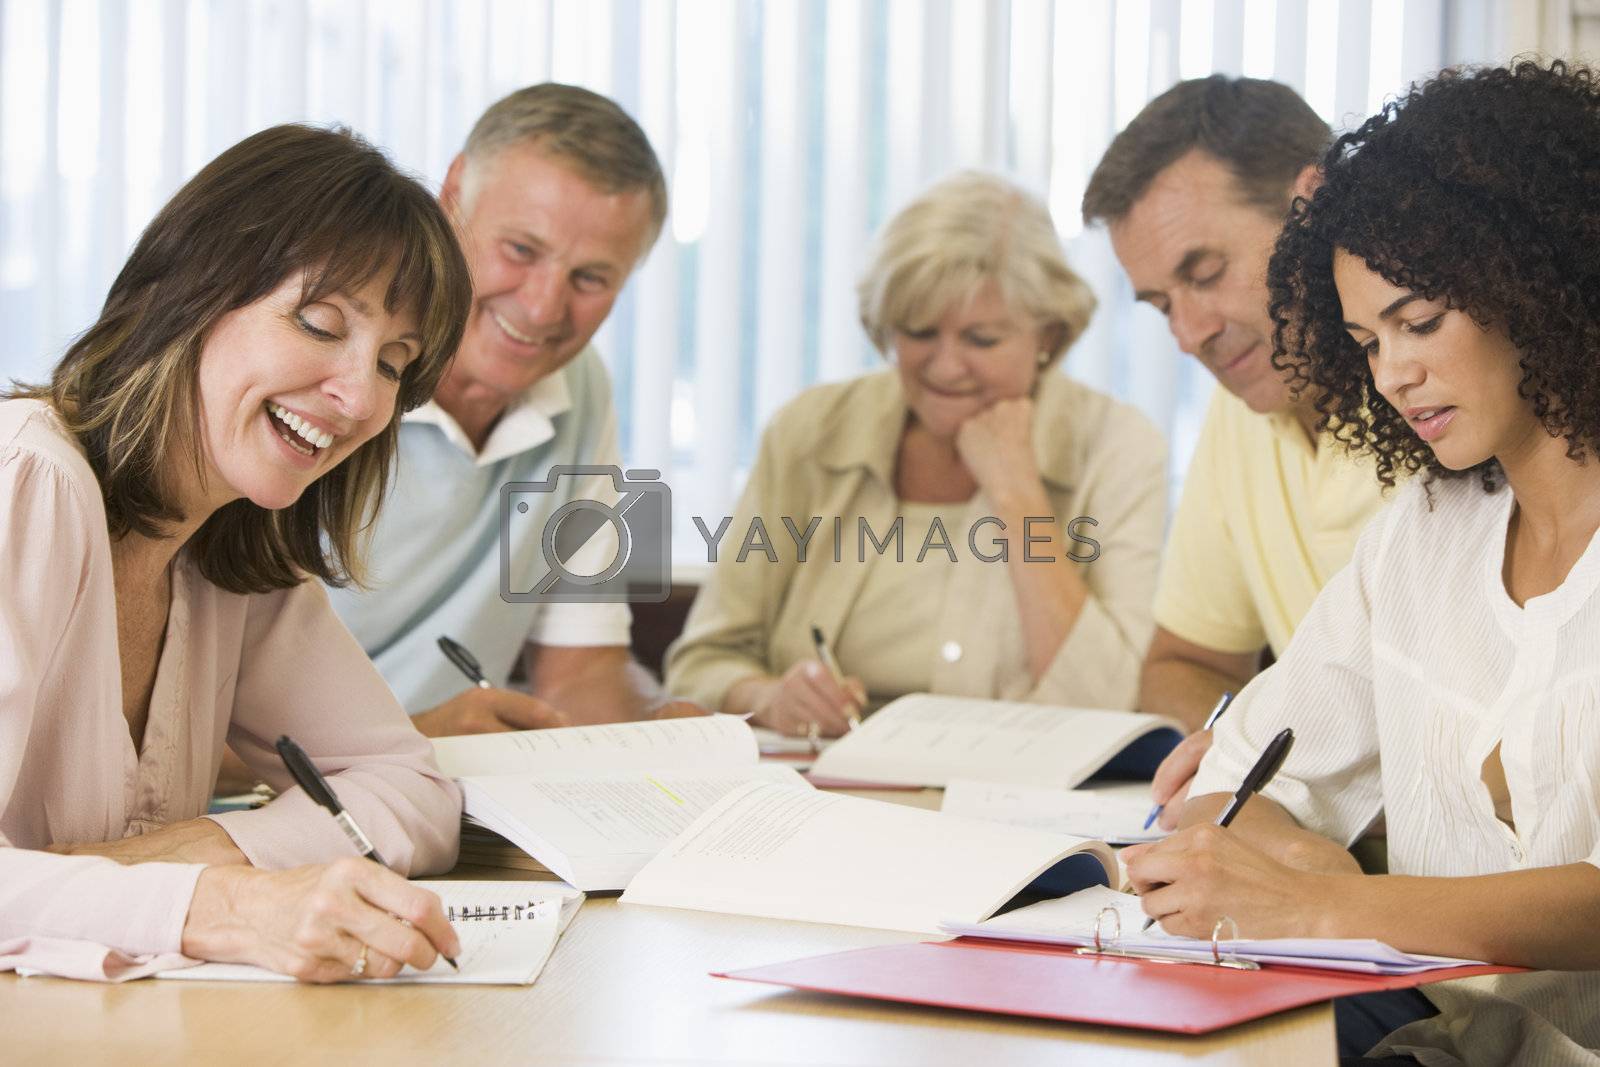 Royalty free image of Five adult students studying at table (depth of field) by MonkeyBusiness